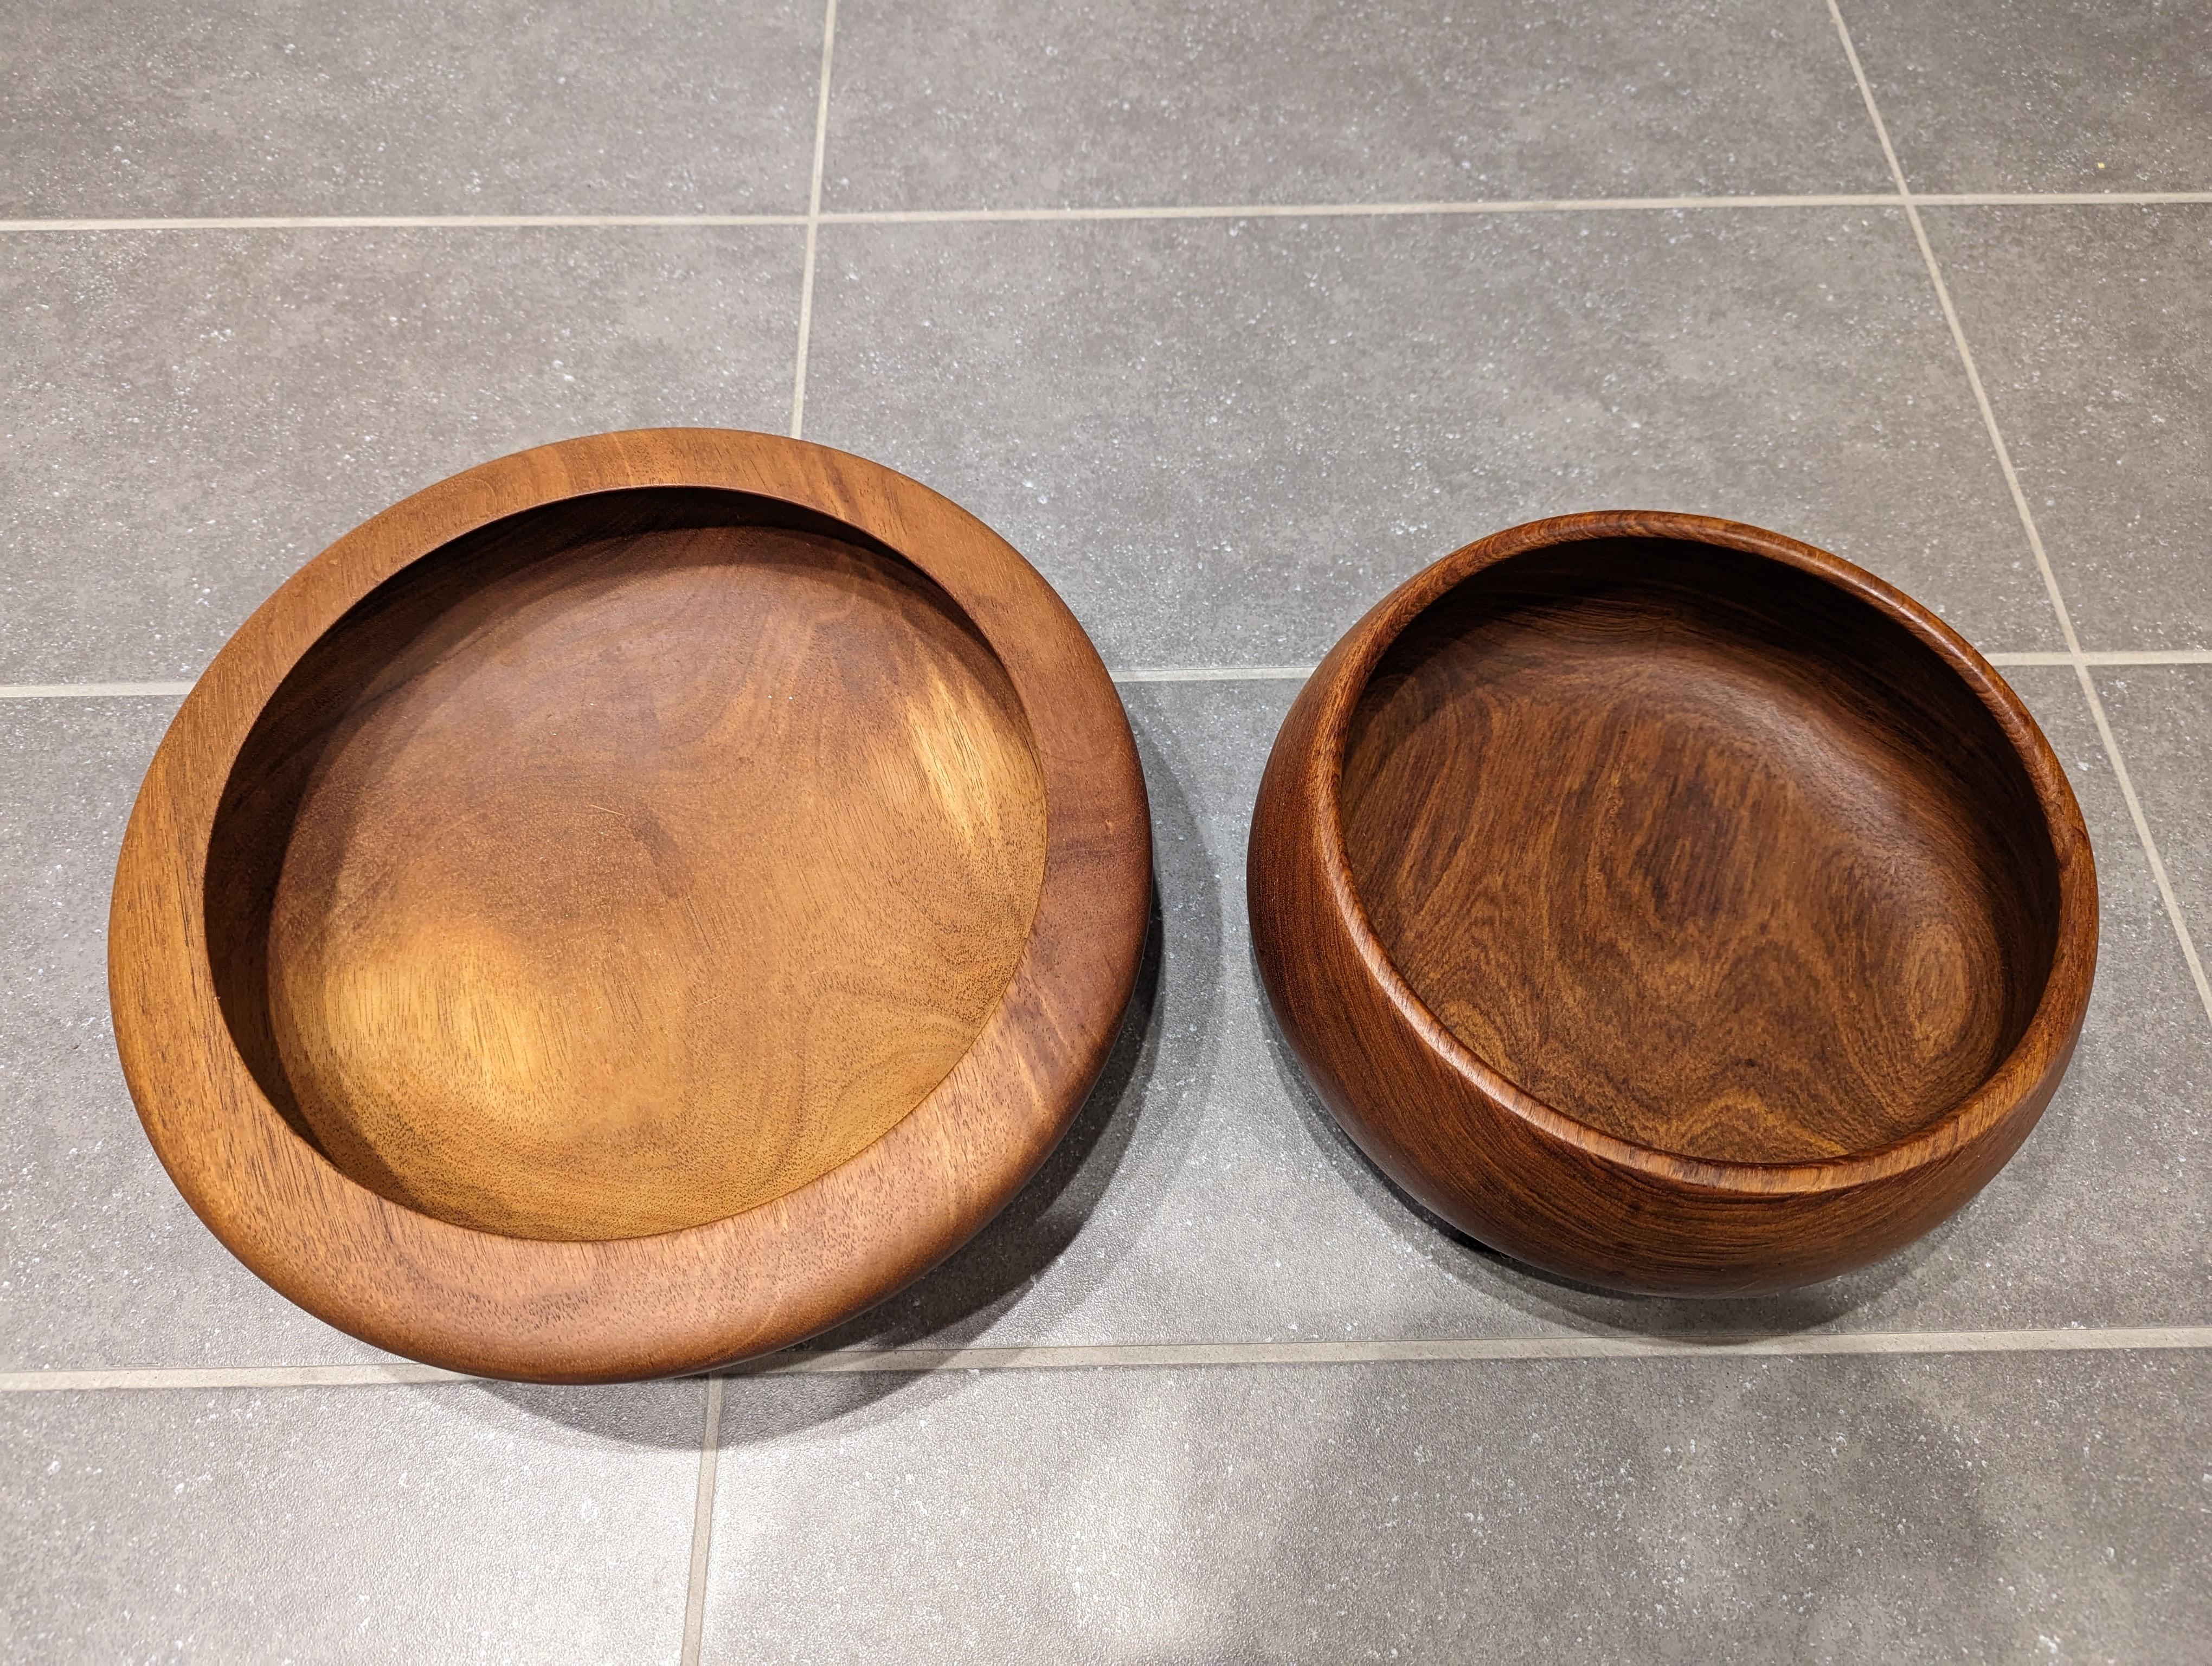 Pair of large teak bowls.

Nice vintage condition.

Larger bowl measures 15x15x4.5 inches.

Nice teak color and grain.